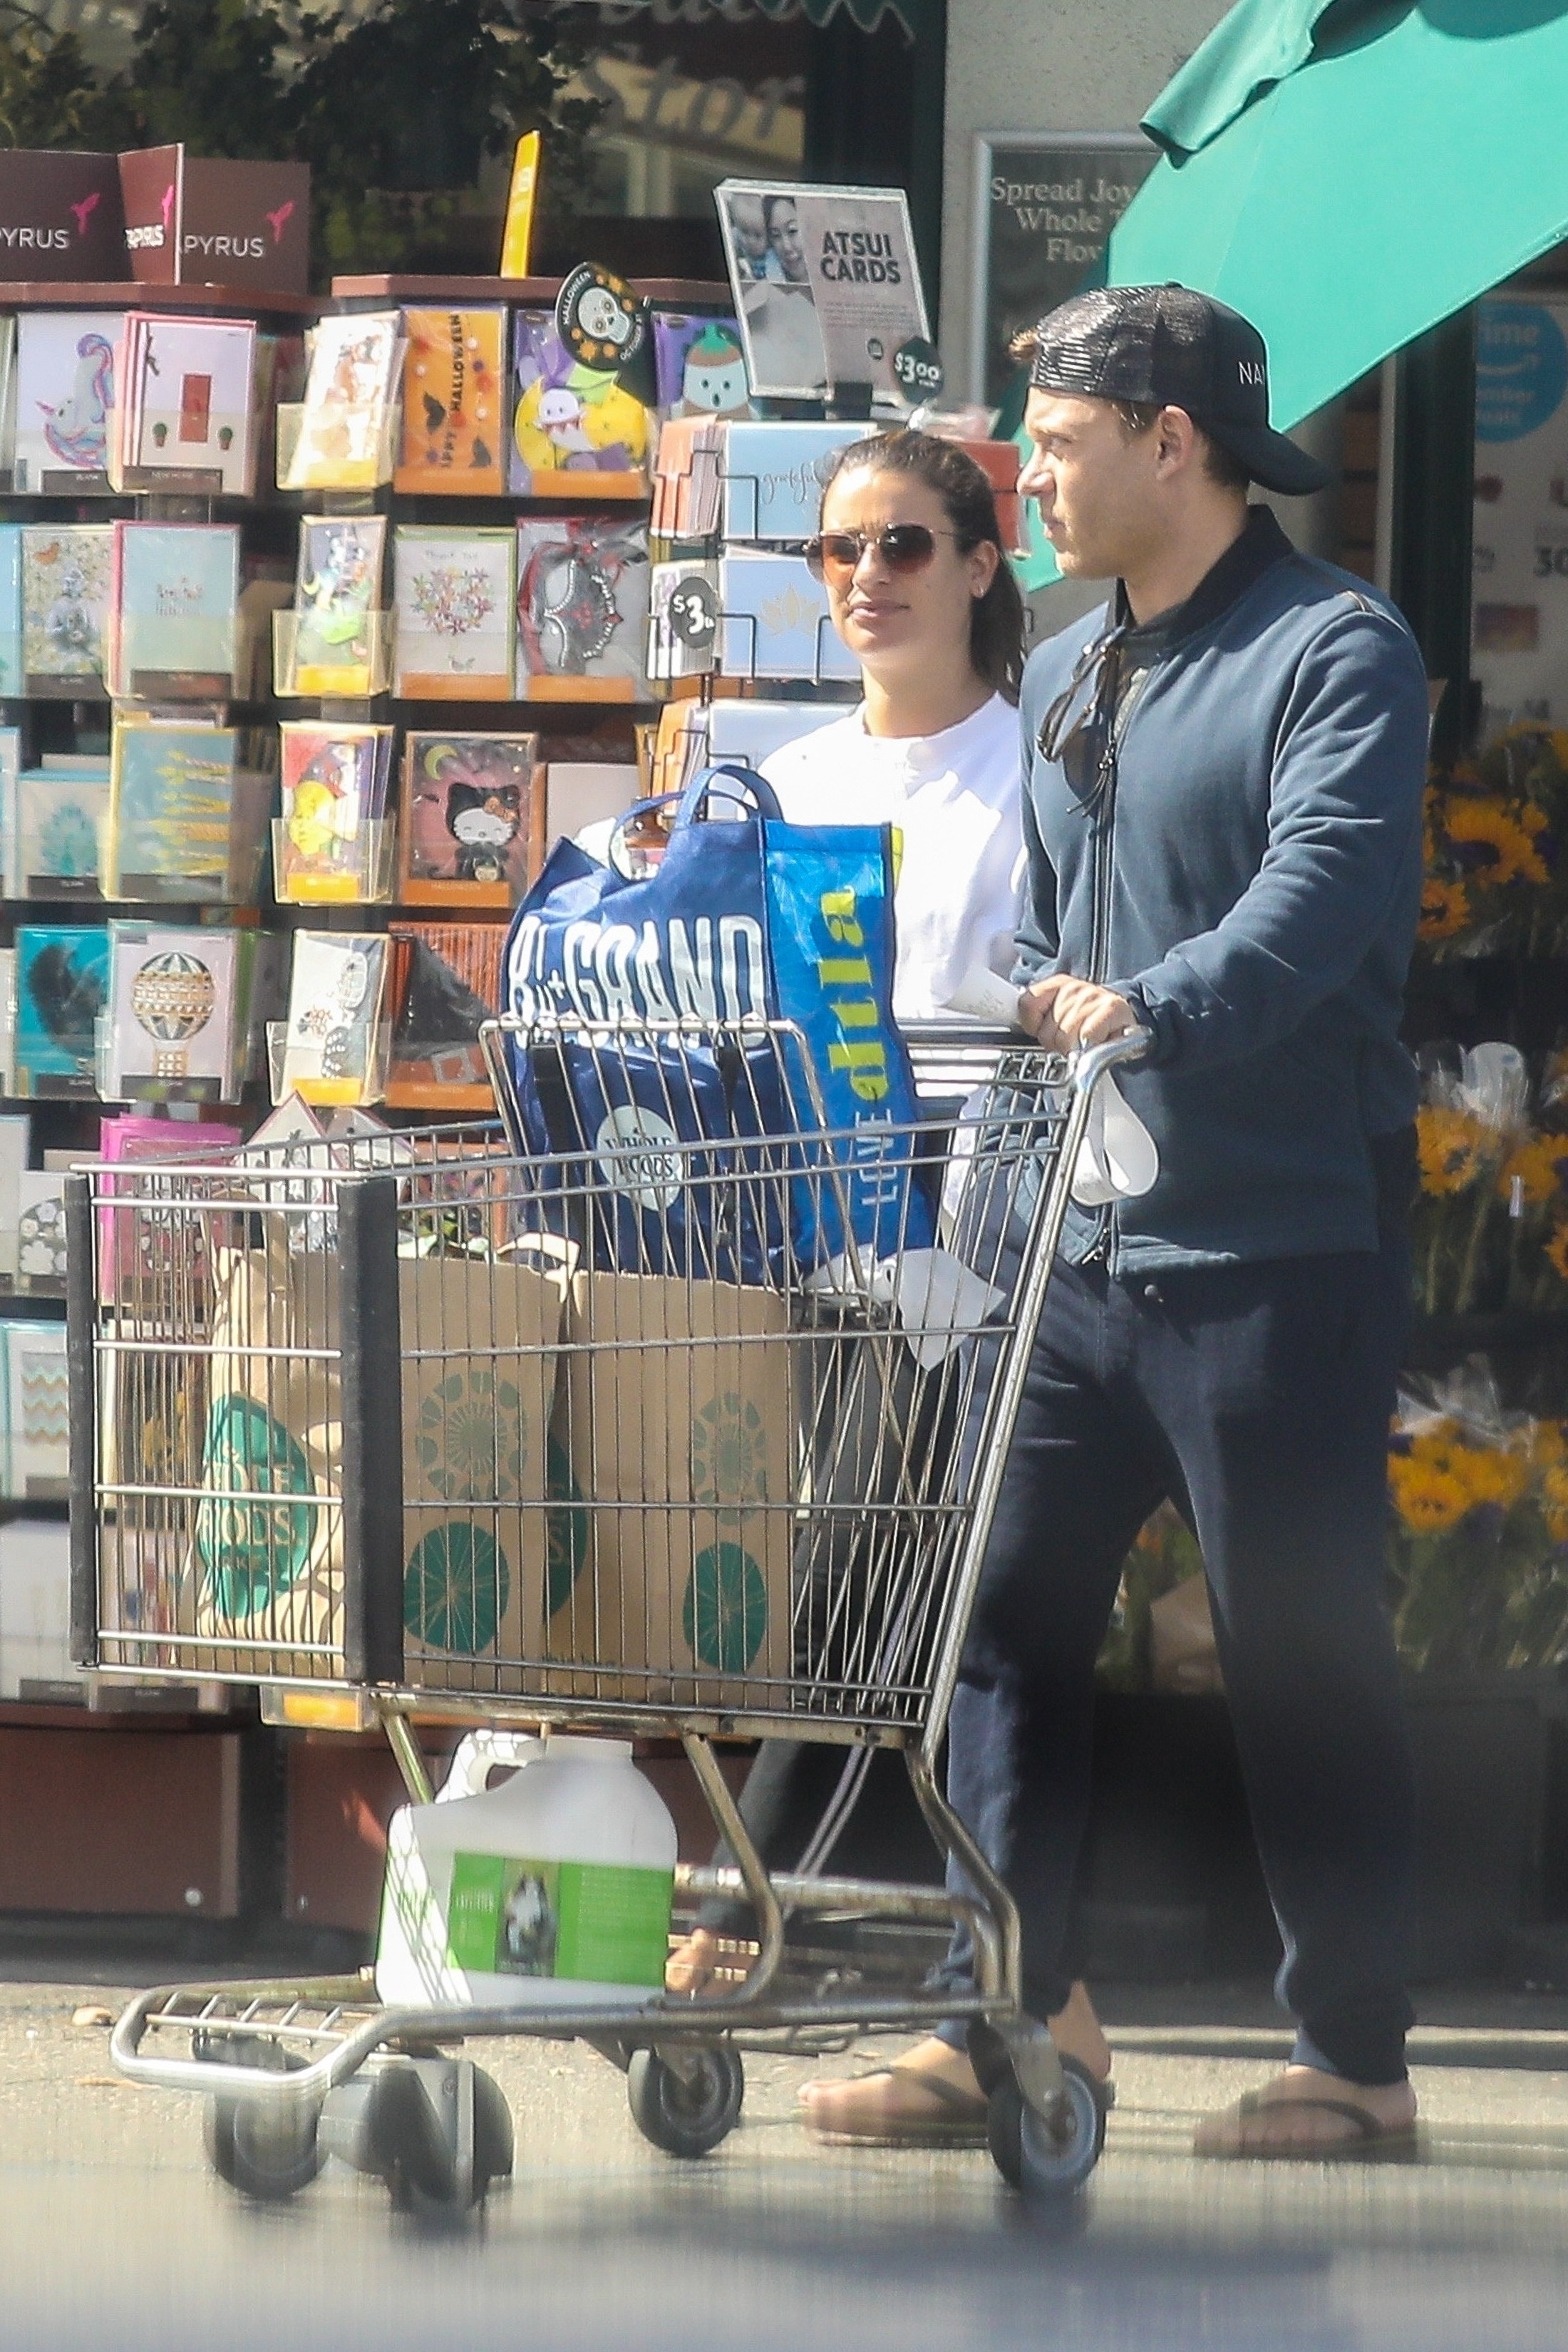 lea-michele-at-whole-foods-with-z-10072018-2.jpg